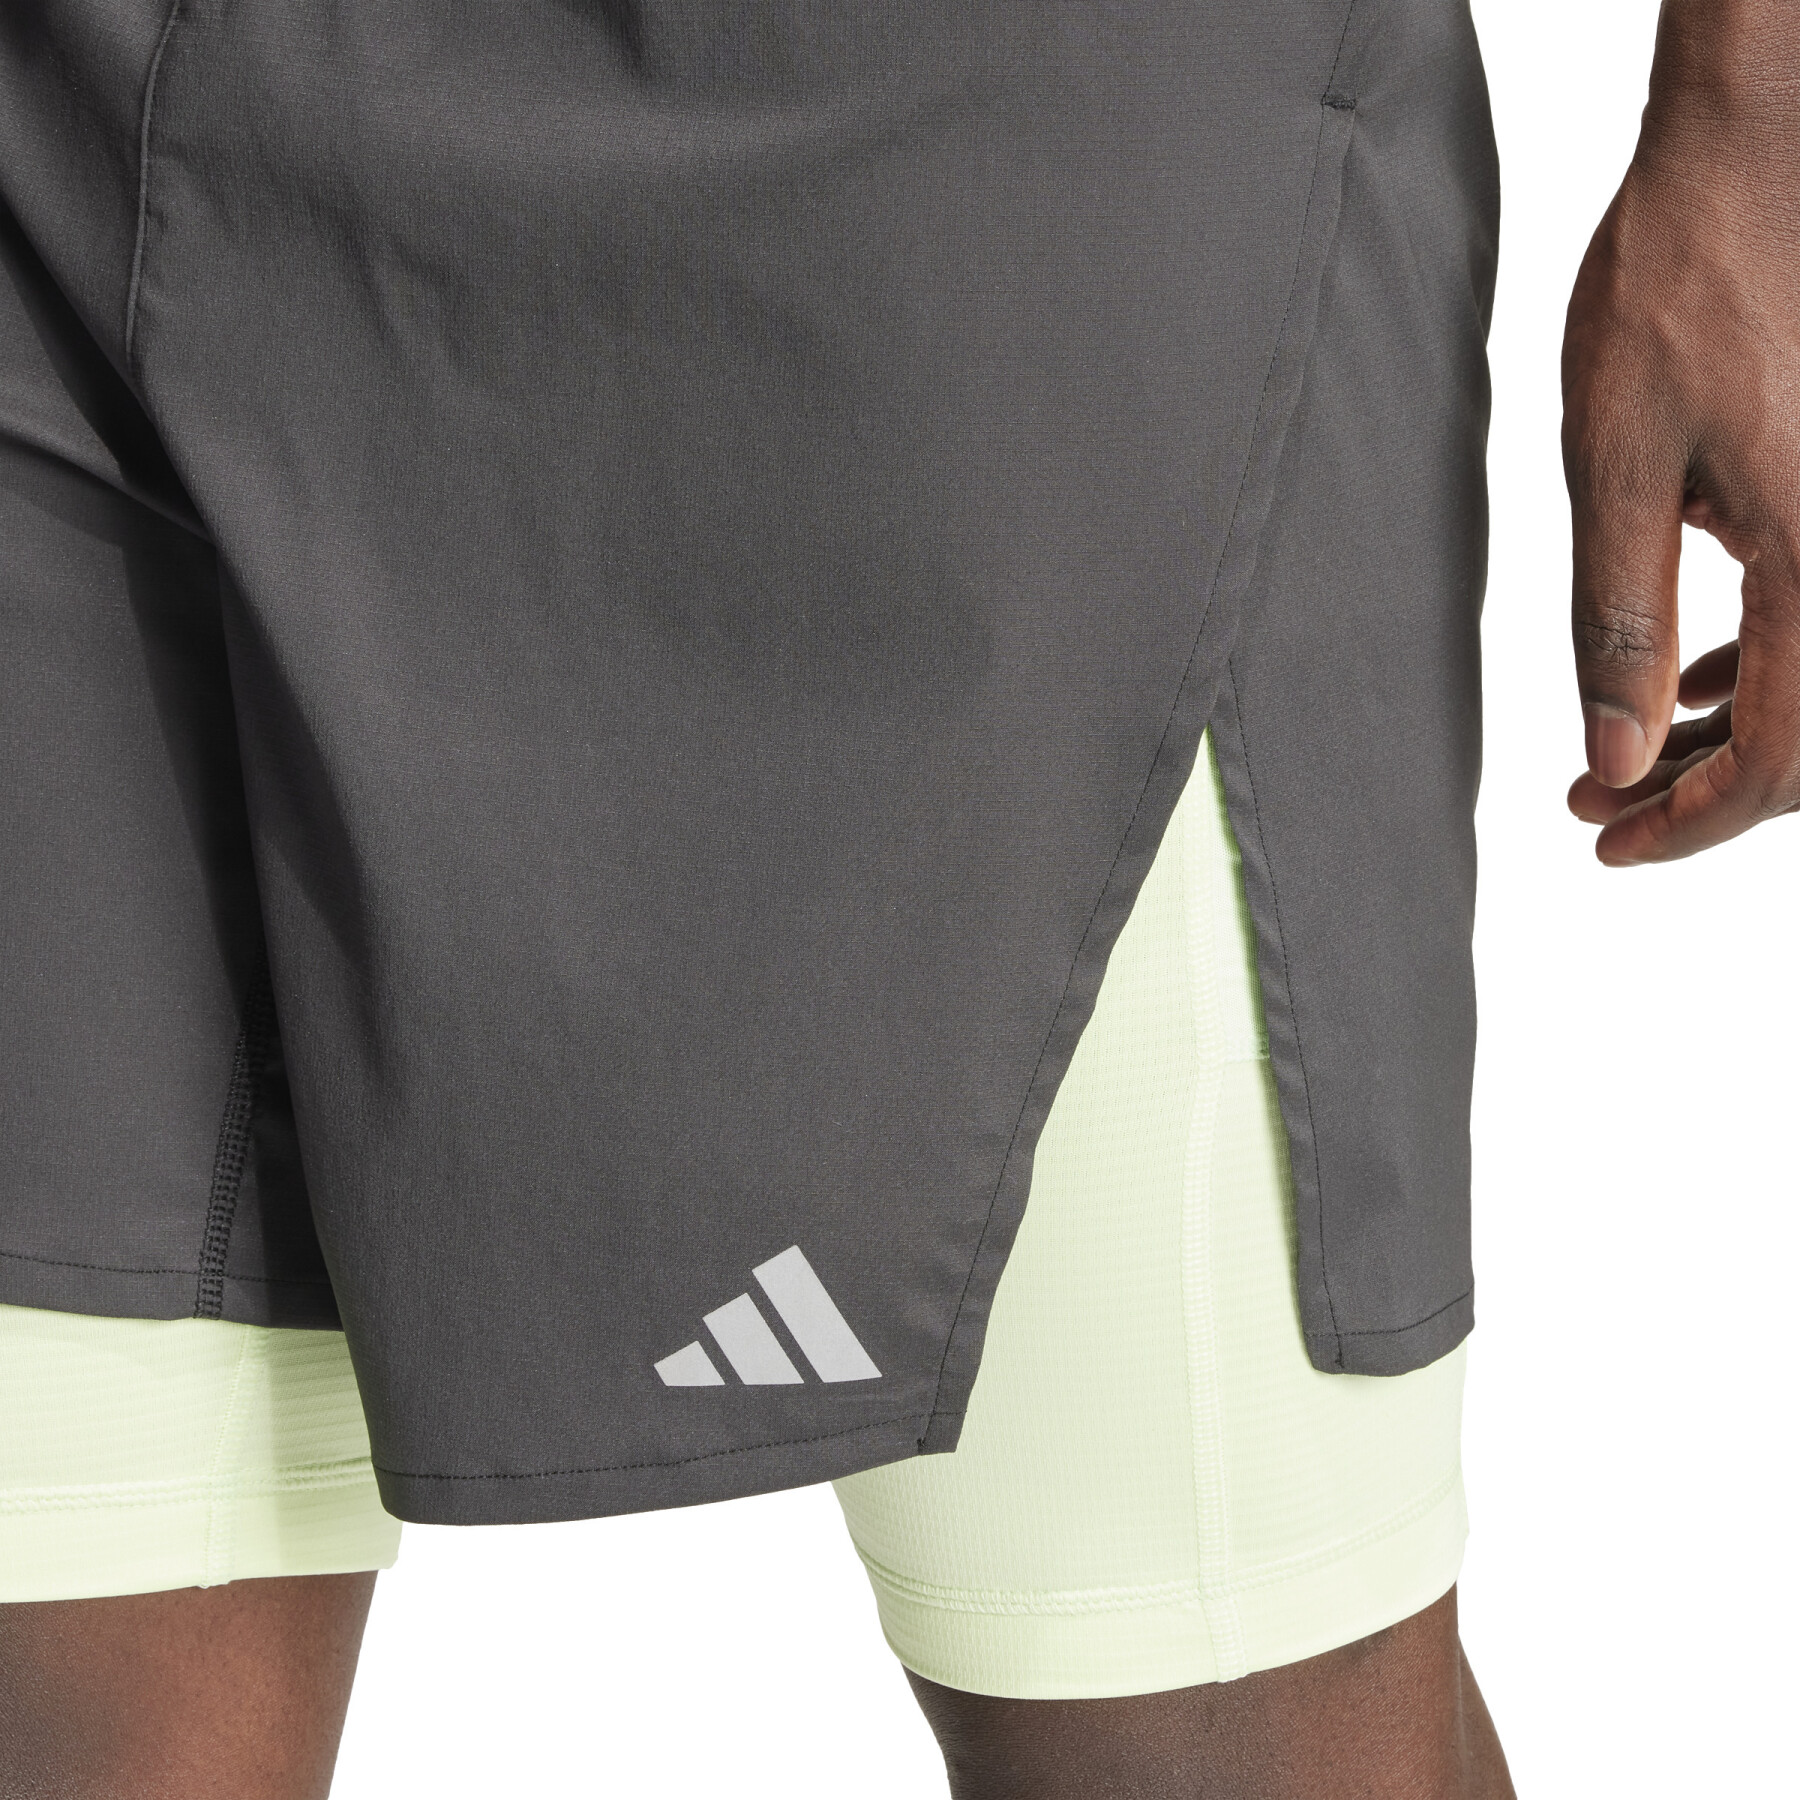 2in1 Shorts adidas Hiit Workout HEAT.RDY